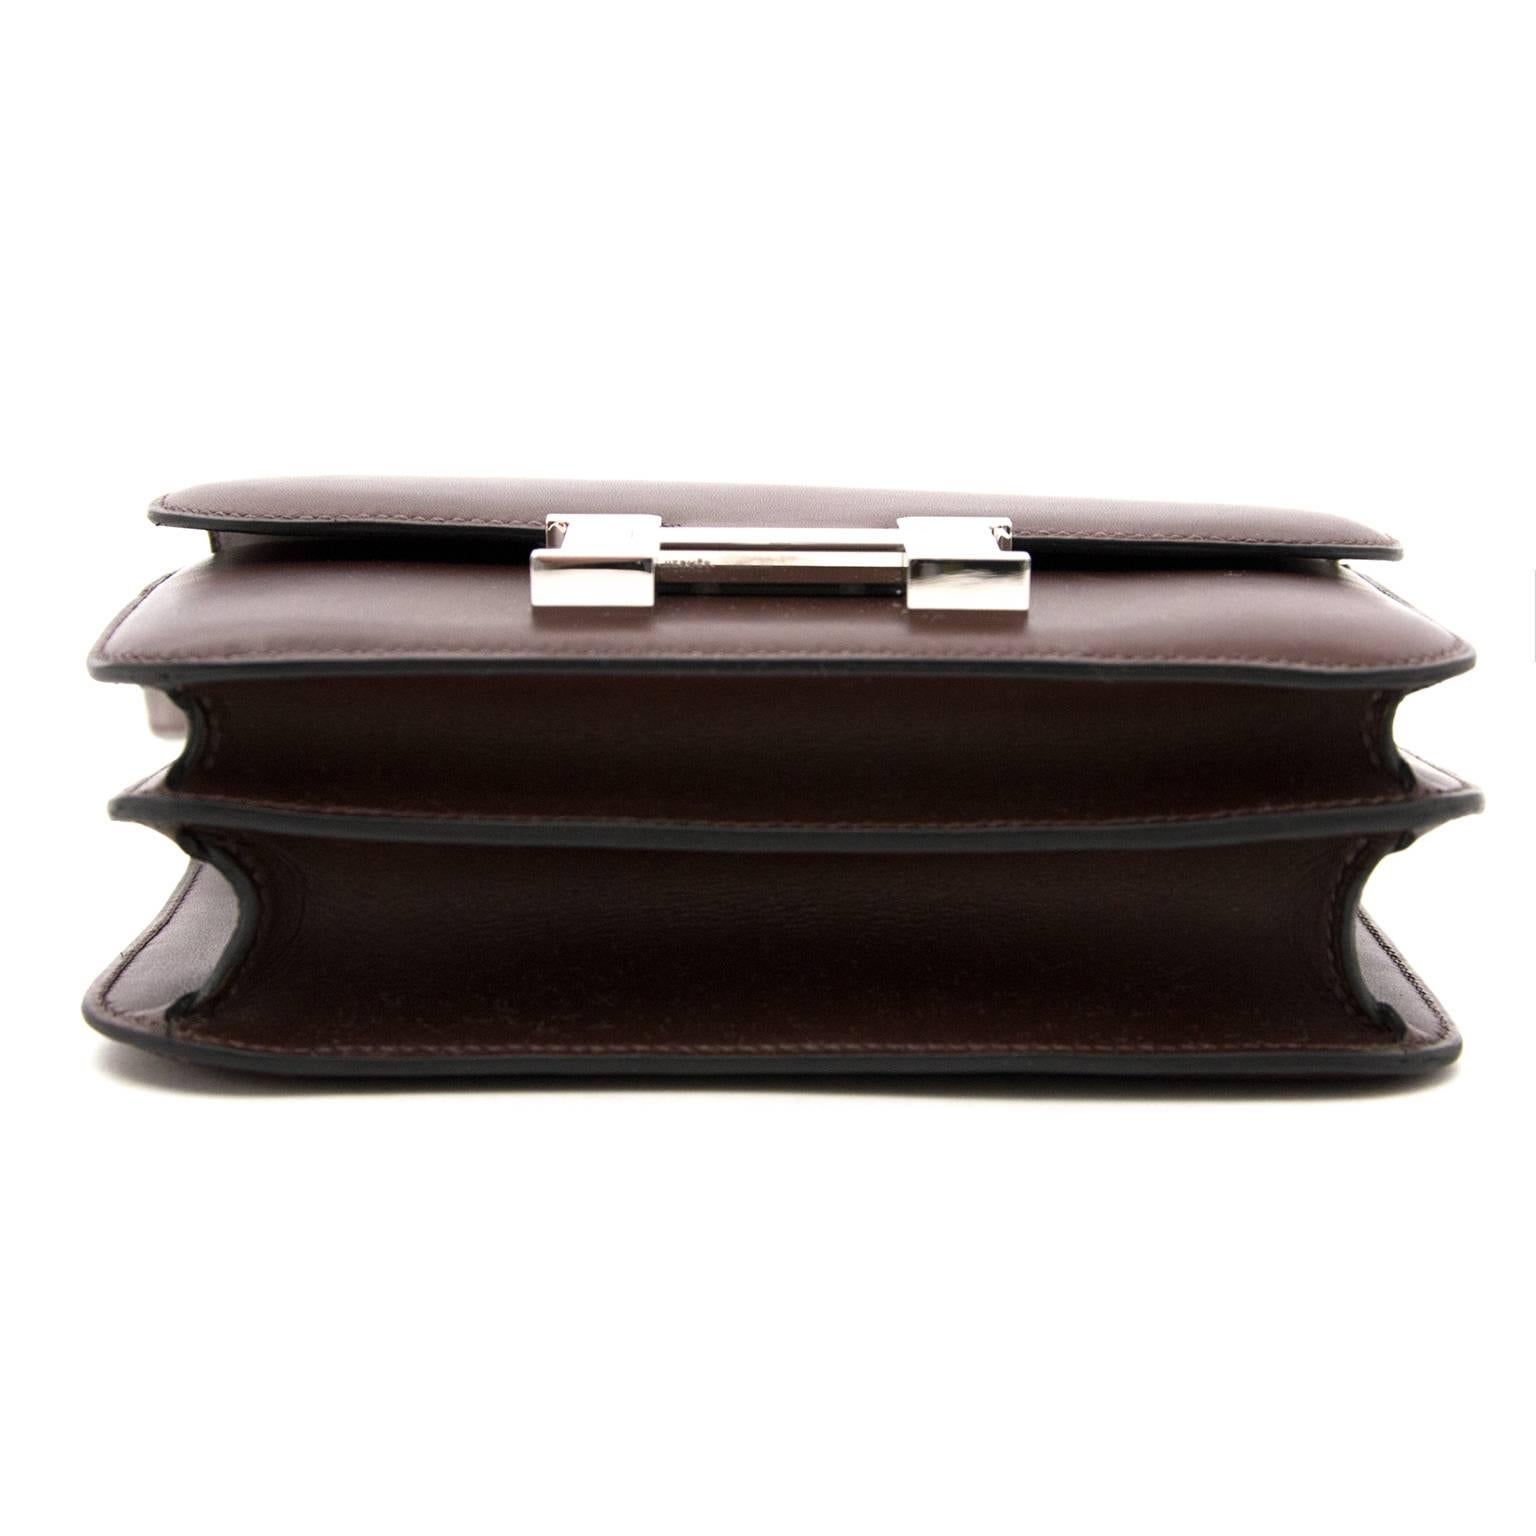 
This little gem is the Hermès Mini Constance III in super soft butler leather in timeless 'Moka',  very dark brown with slight hint of purple undertones .
The silver-tone H closure gives it a more mature, feminine touch.

The Constance is the